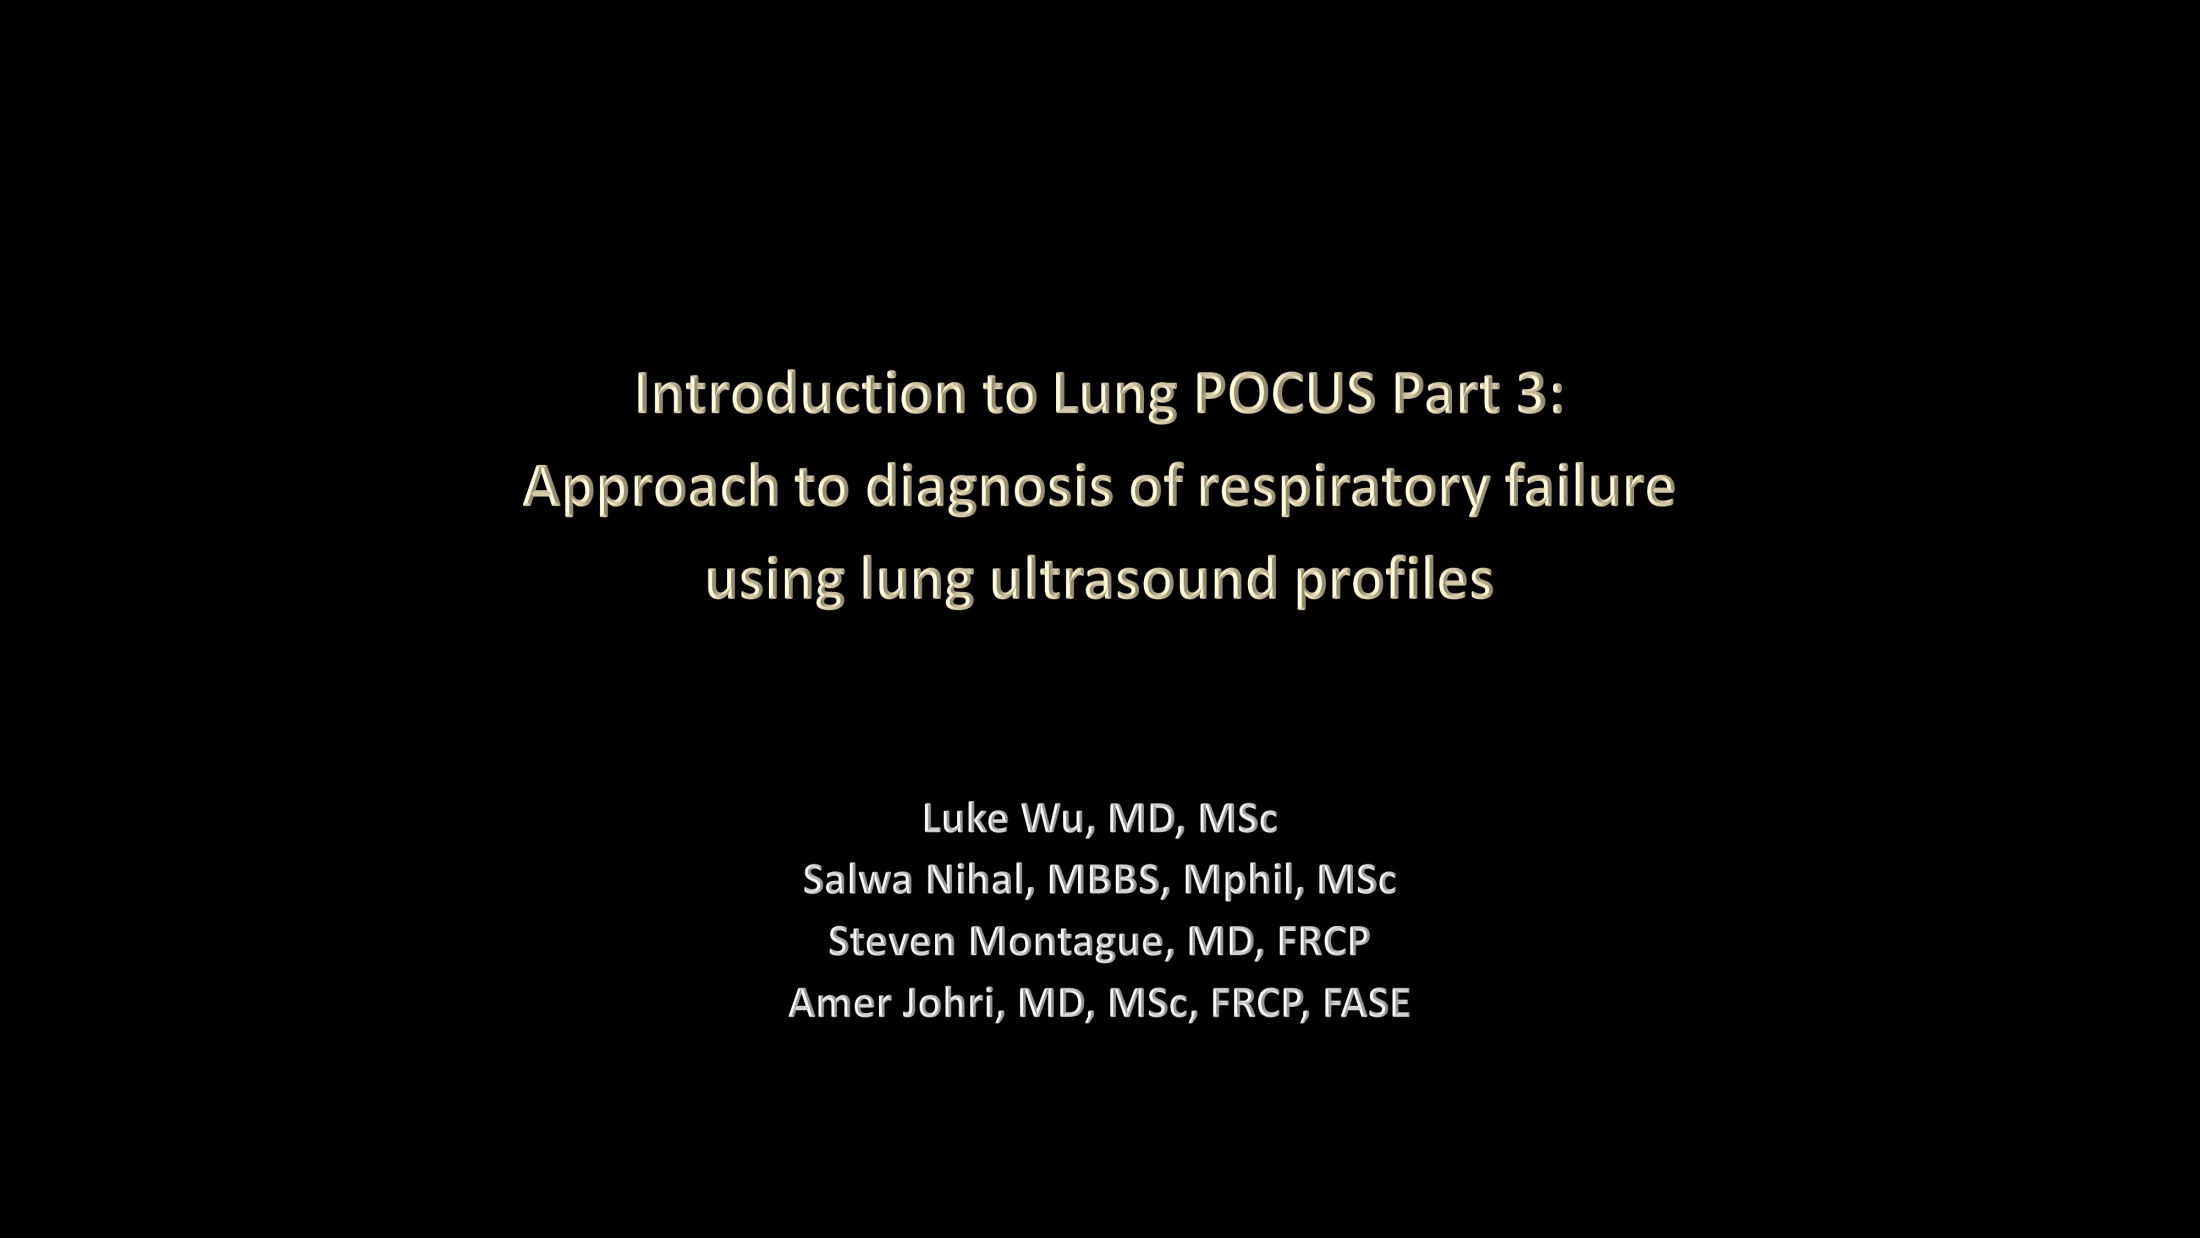 LUS Part 3 - Approach to diagnosis of respiratory failure using LUS profiles